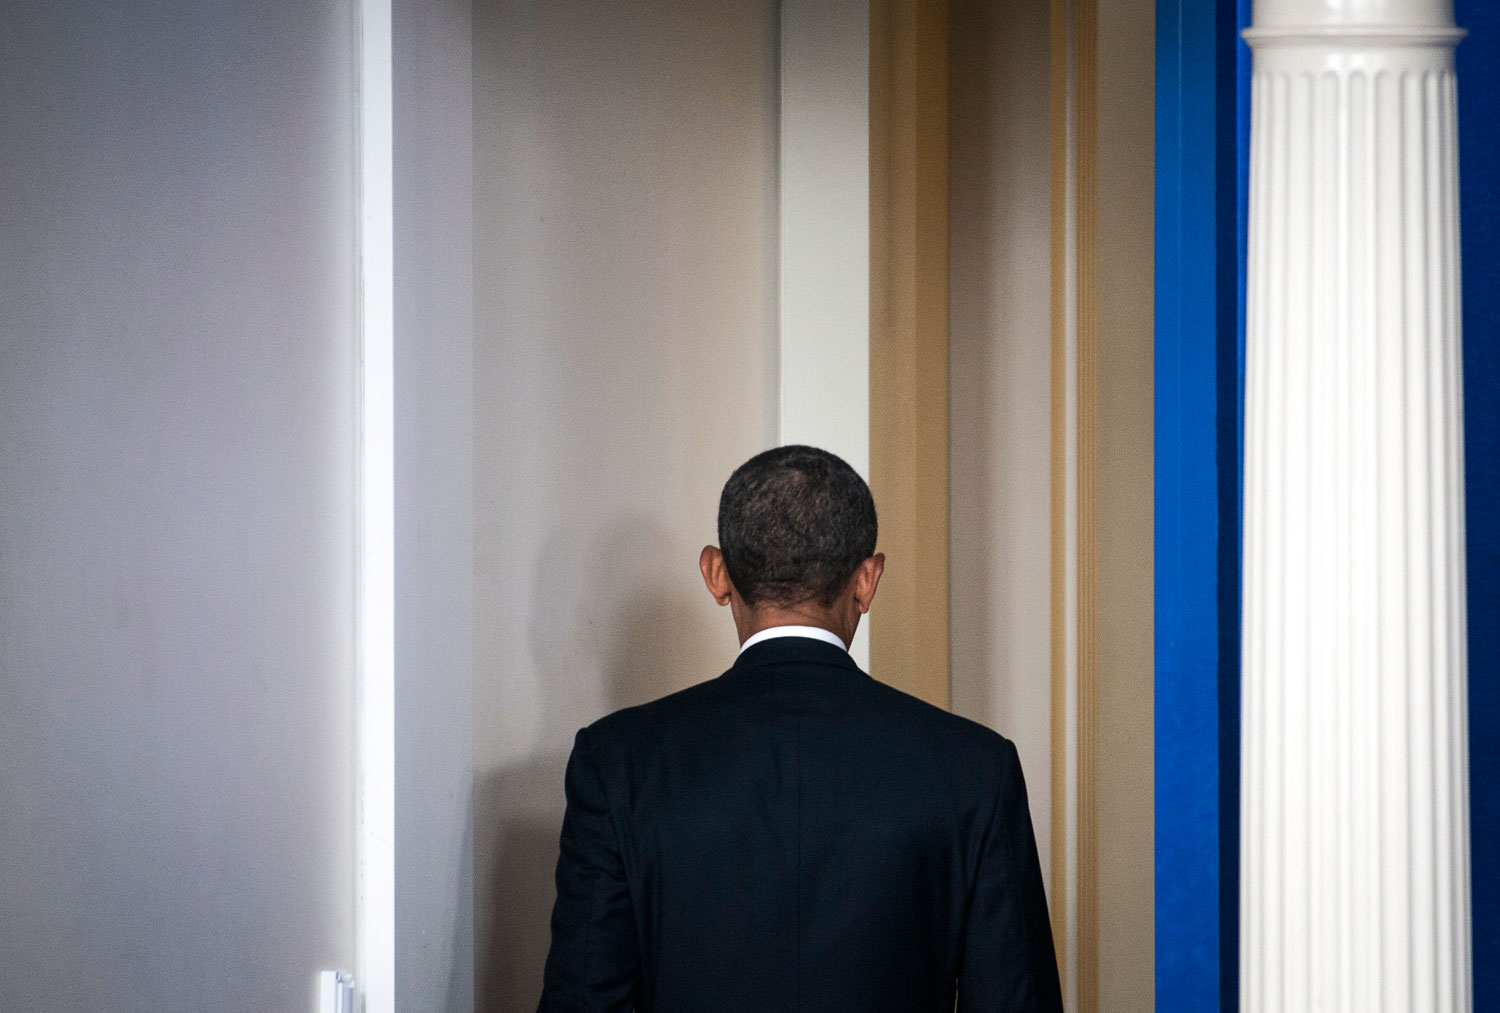 President Barack Obama leaves after speaking to reporters at the White House in Washington, March 17, 2014.